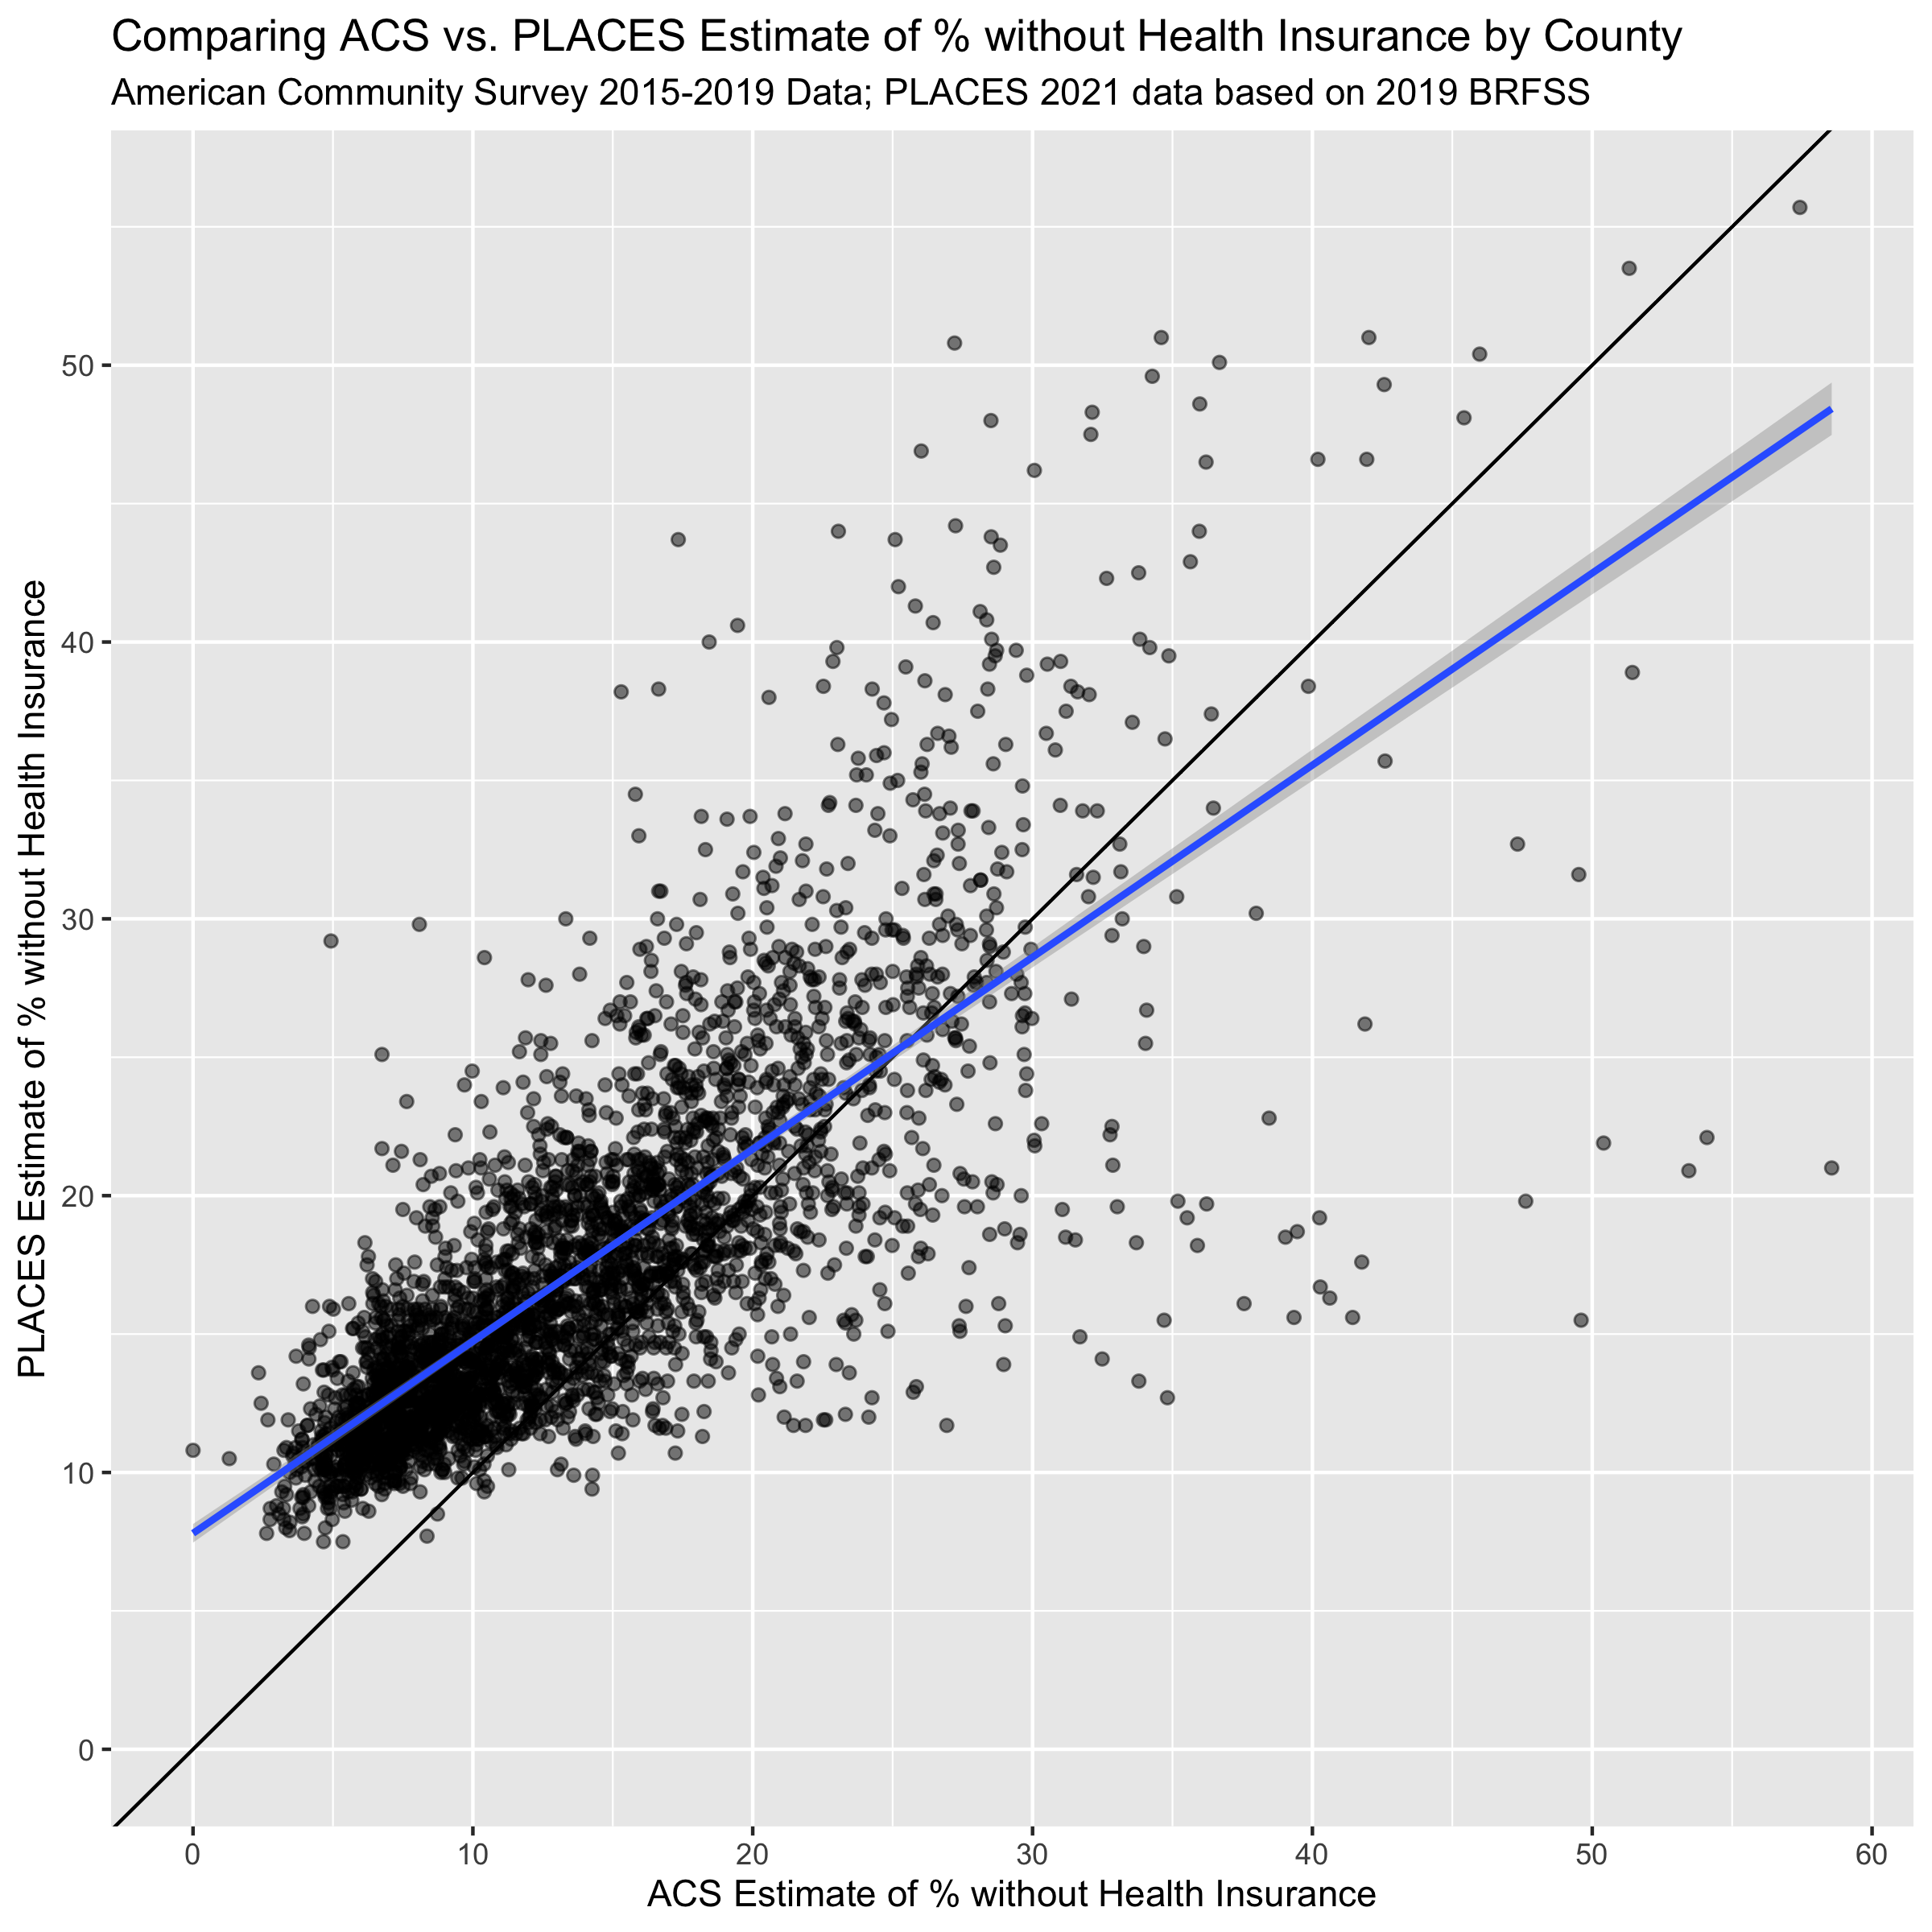 A scatterplot of ACS vs. PLACES estimates for the % without health insurance. The solid line shoes the line with slope = 1 and intercept = 0, while the line in blue shows a linear model line of best fit.